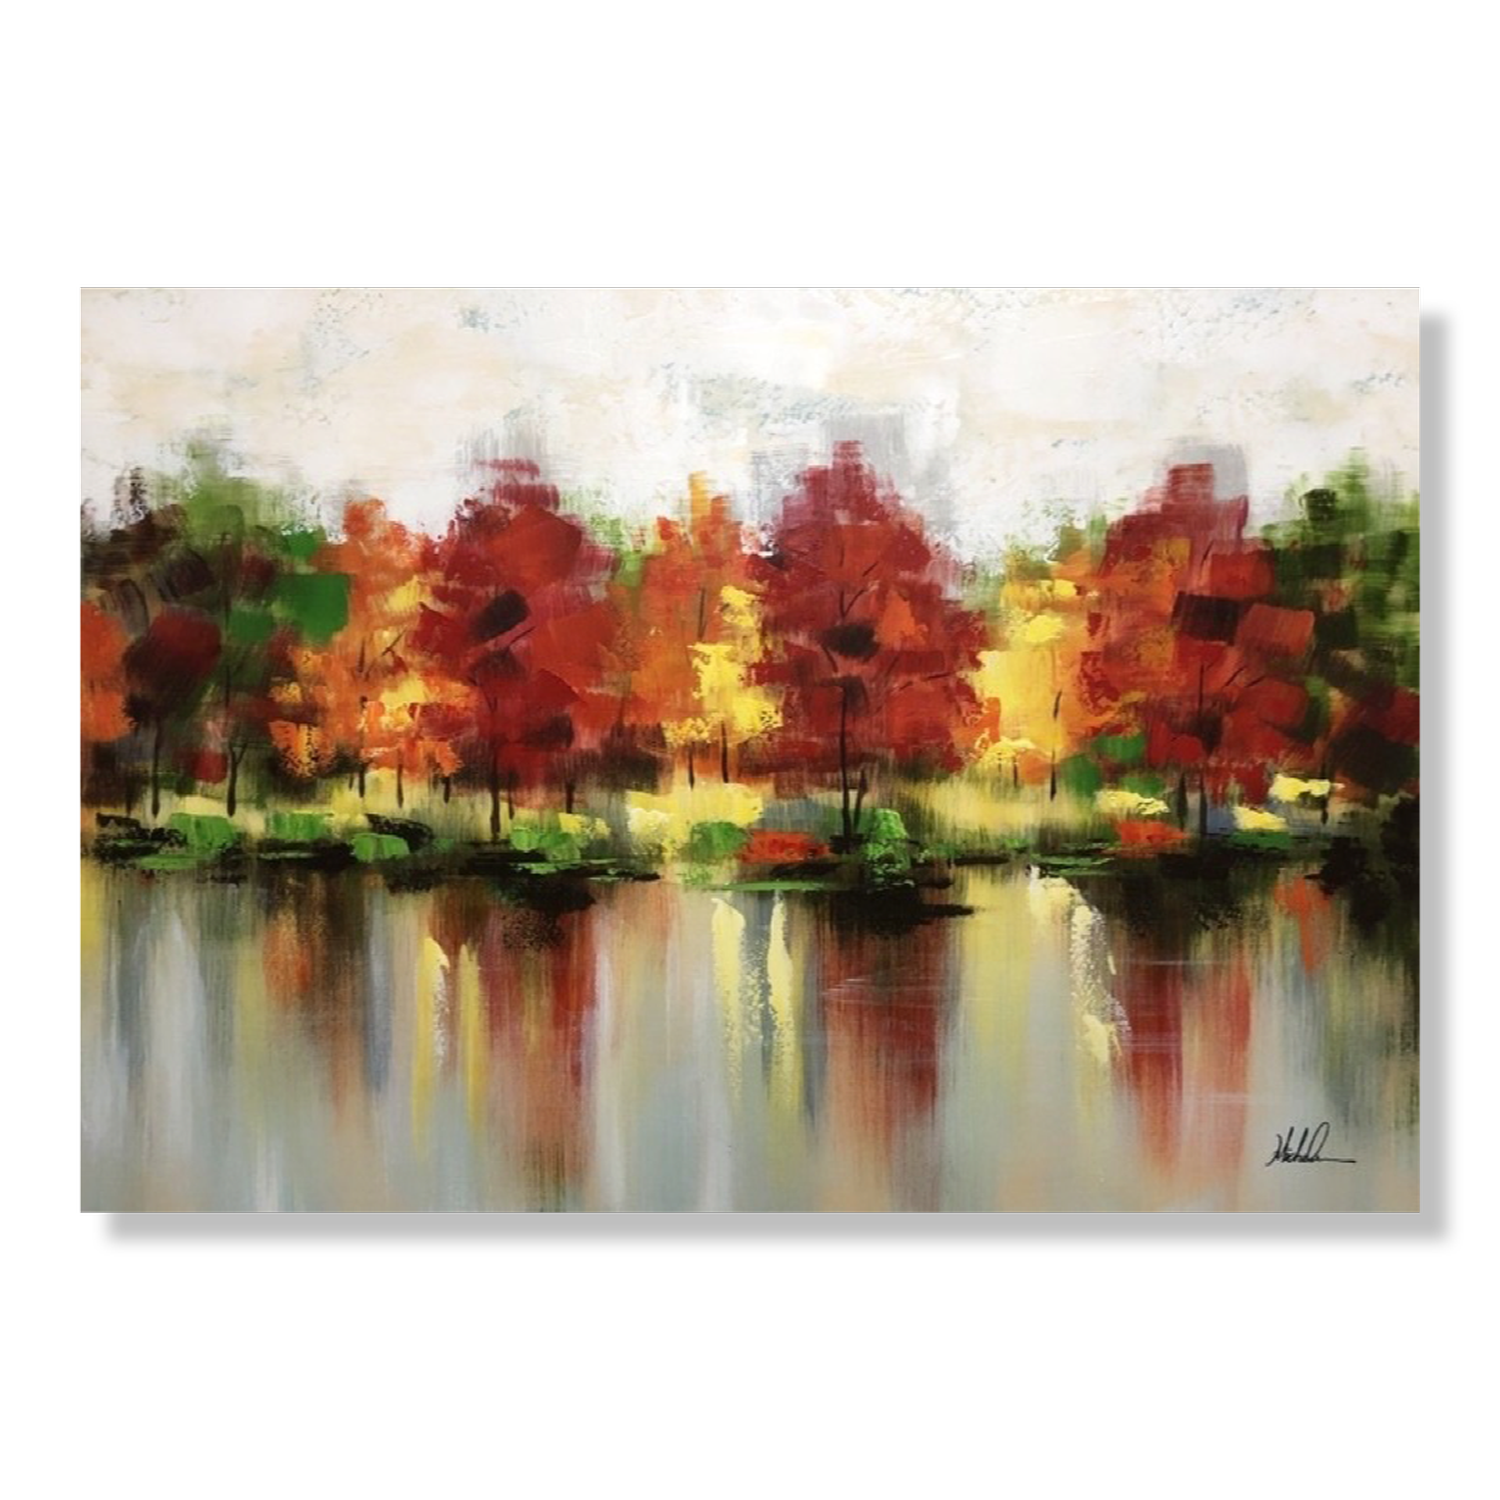 A painting with trees in autumn colours